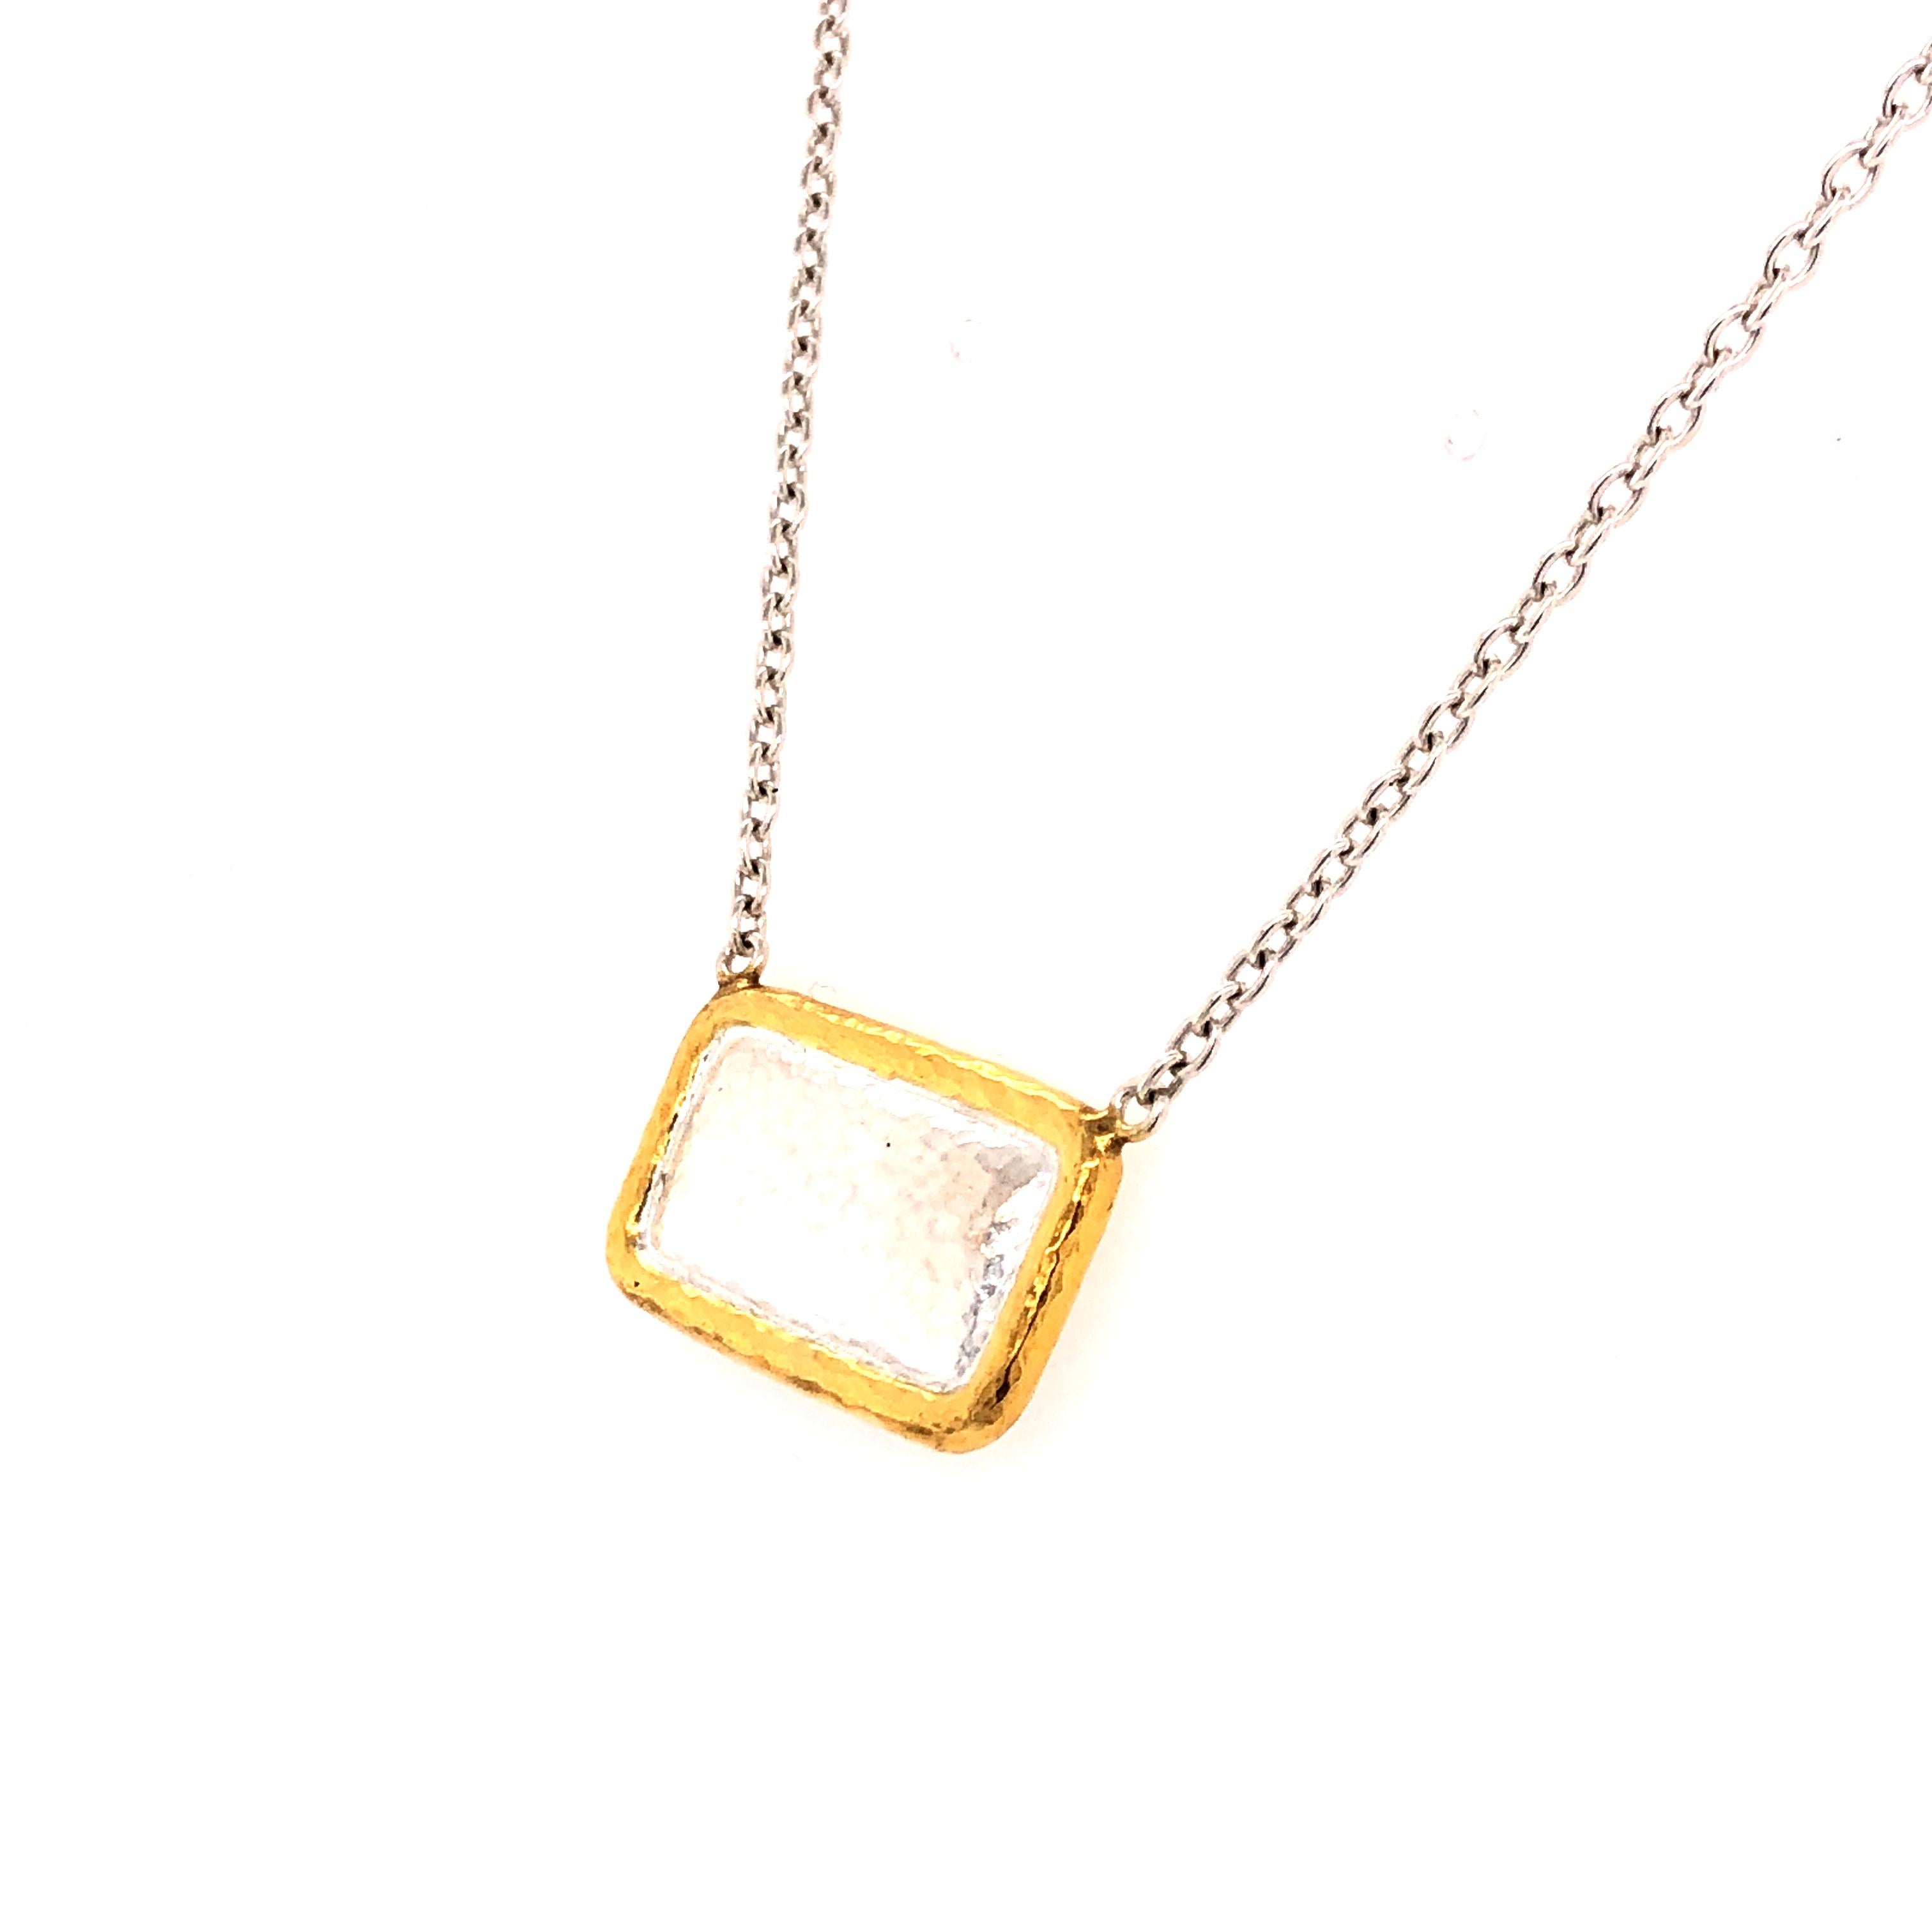 Contemporary  Sterling Silver & 24KY Rectangular Pendant For Sale